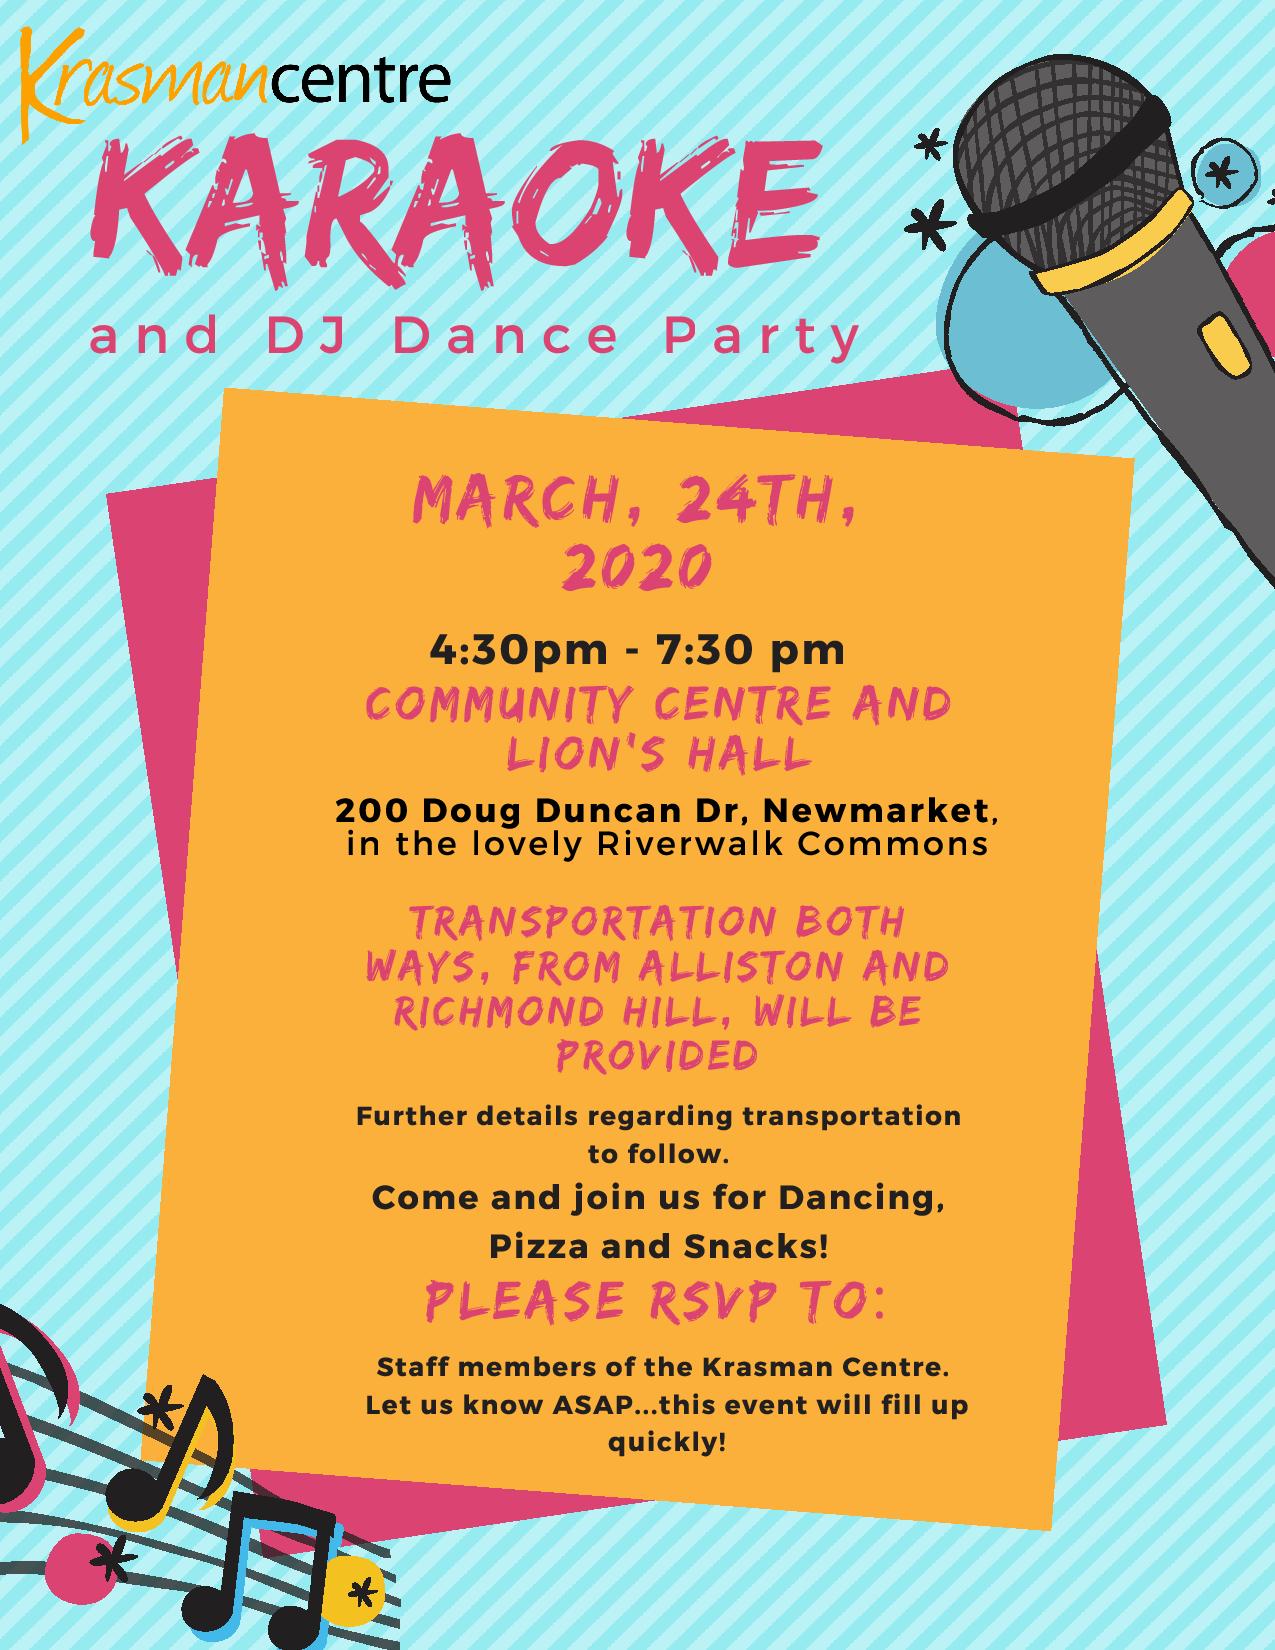 Karaoke and DJ Dance Party on March 24, 2020